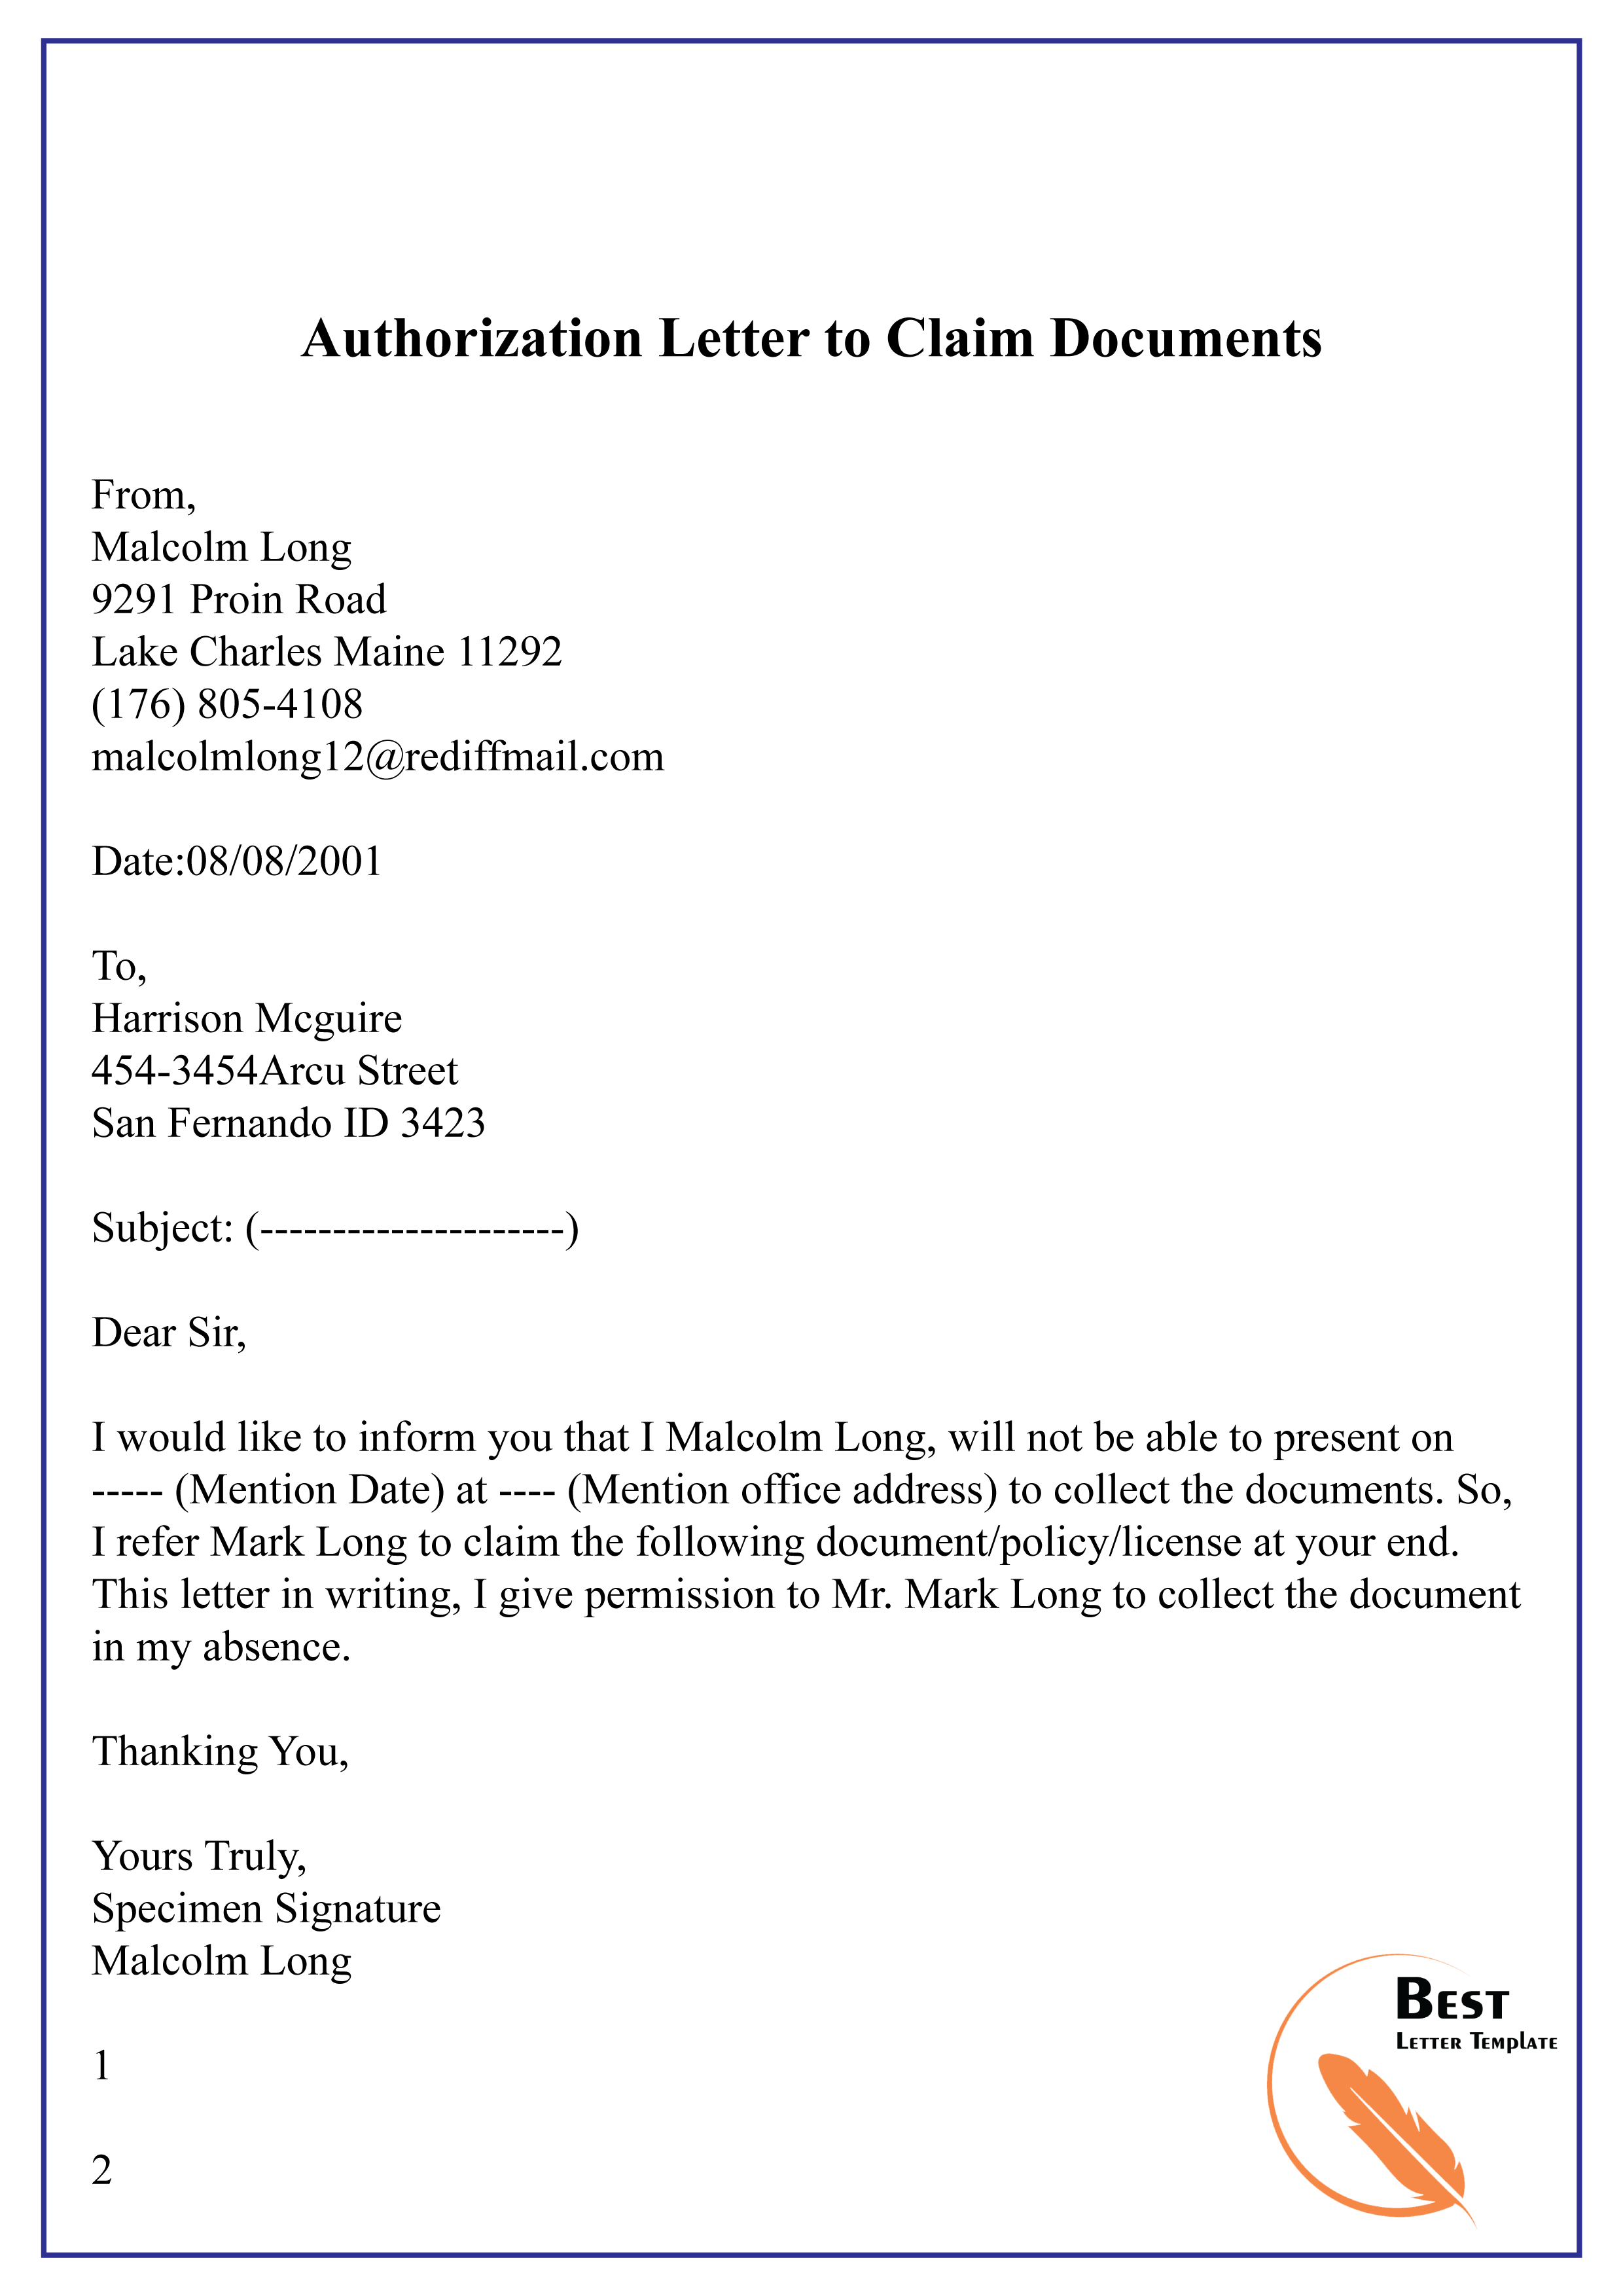 Authorization Letter For Claiming 01 Best Letter Temp - vrogue.co